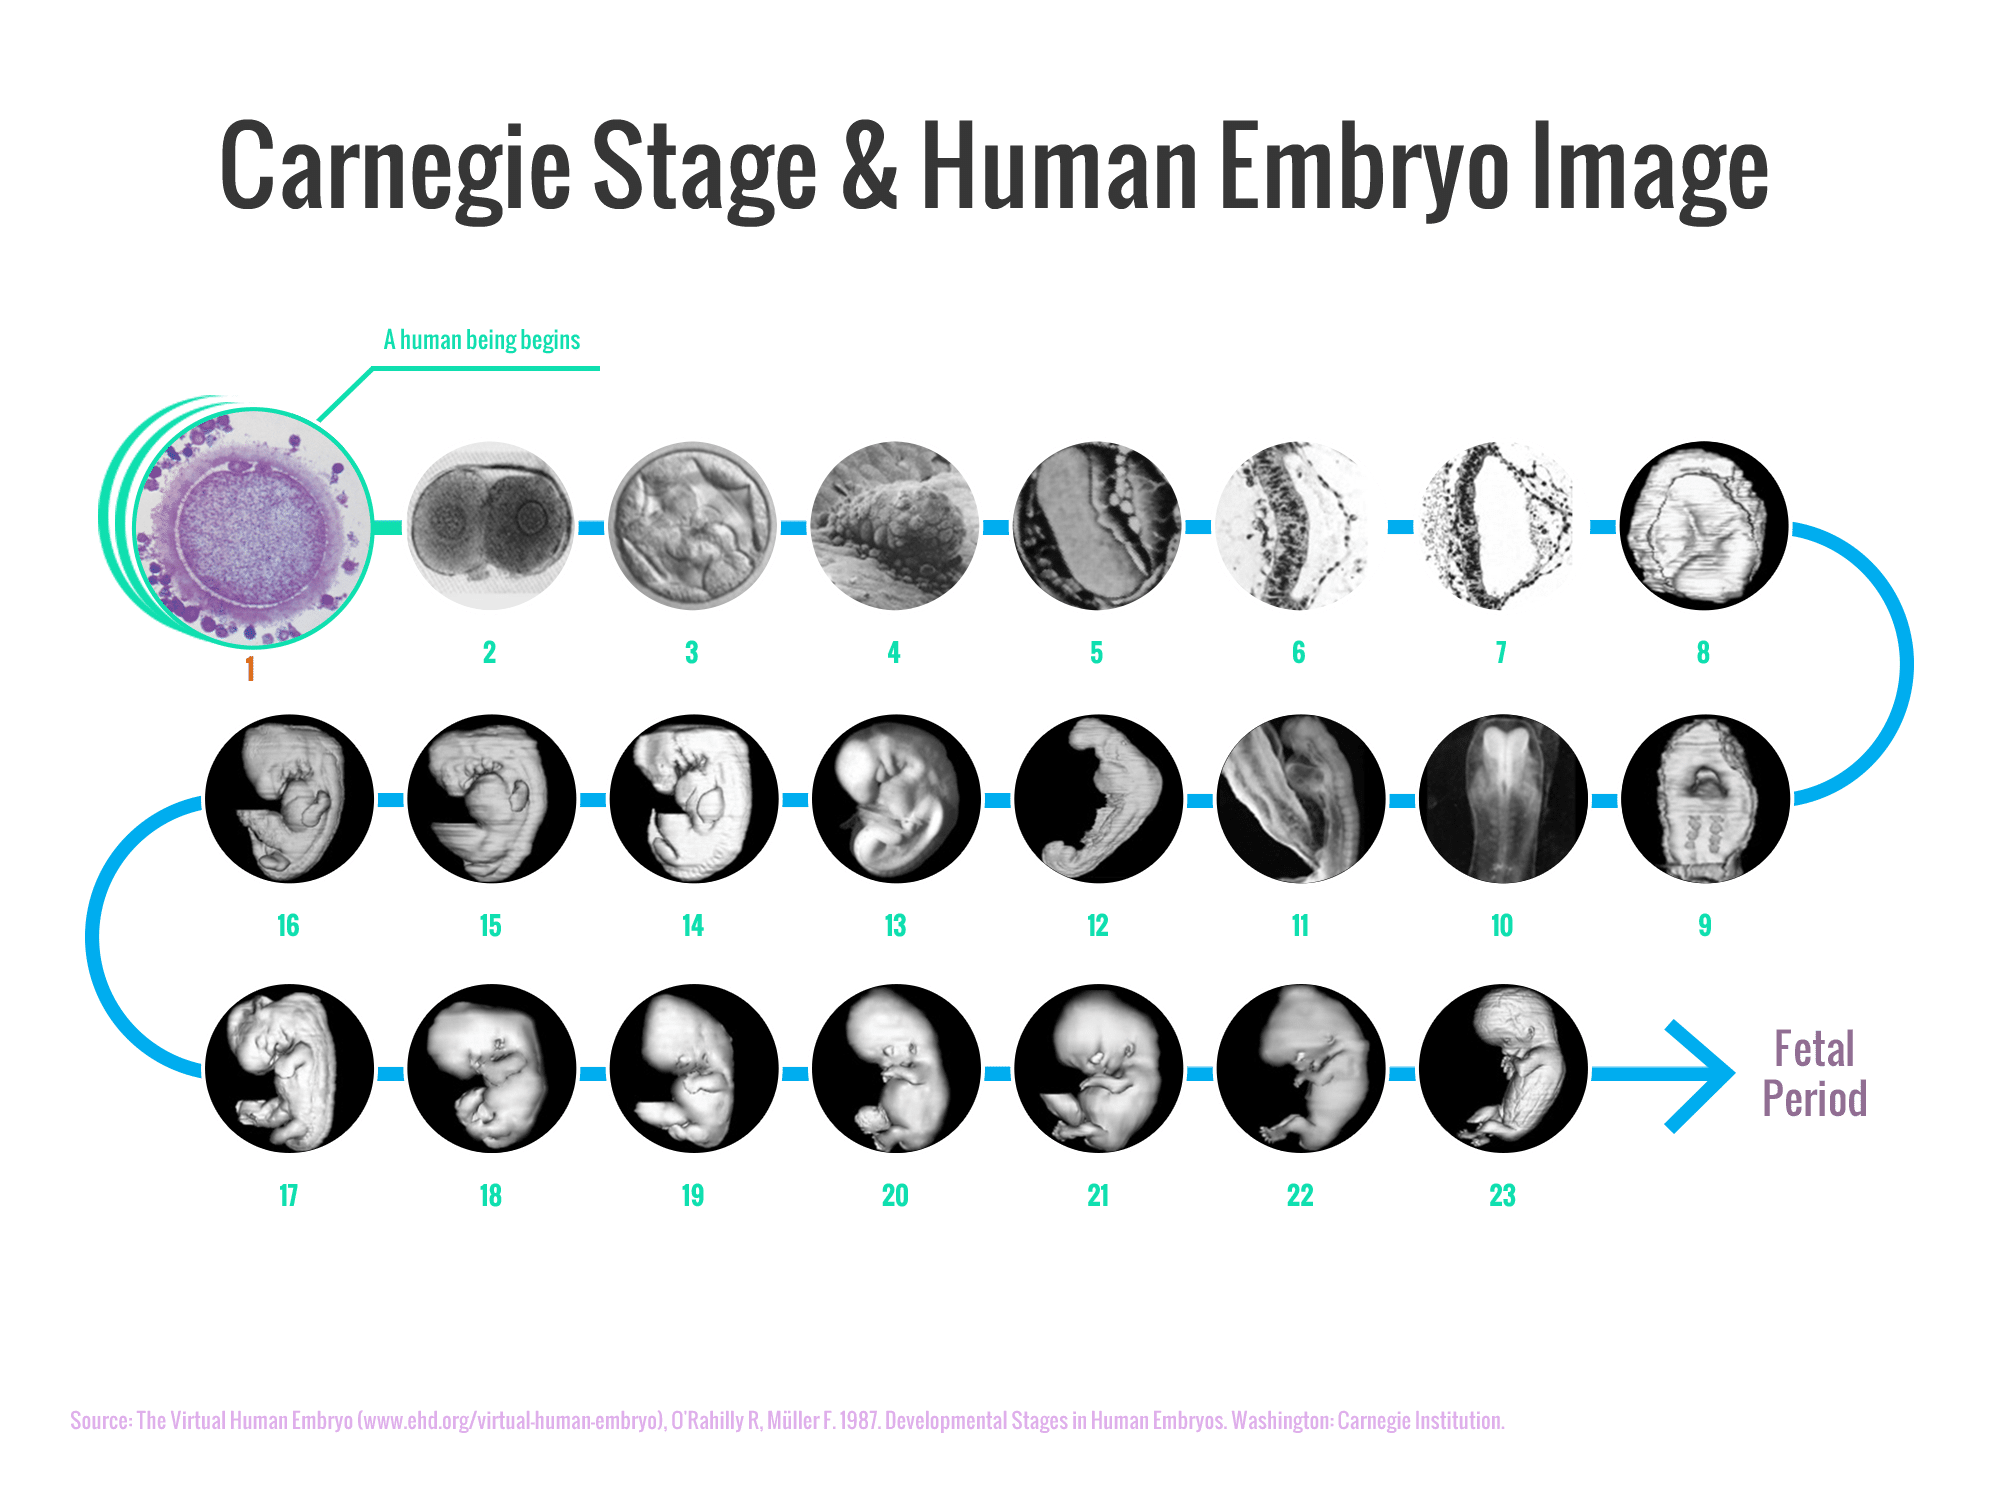 The Carnegie Stages of Human Embryonic Development